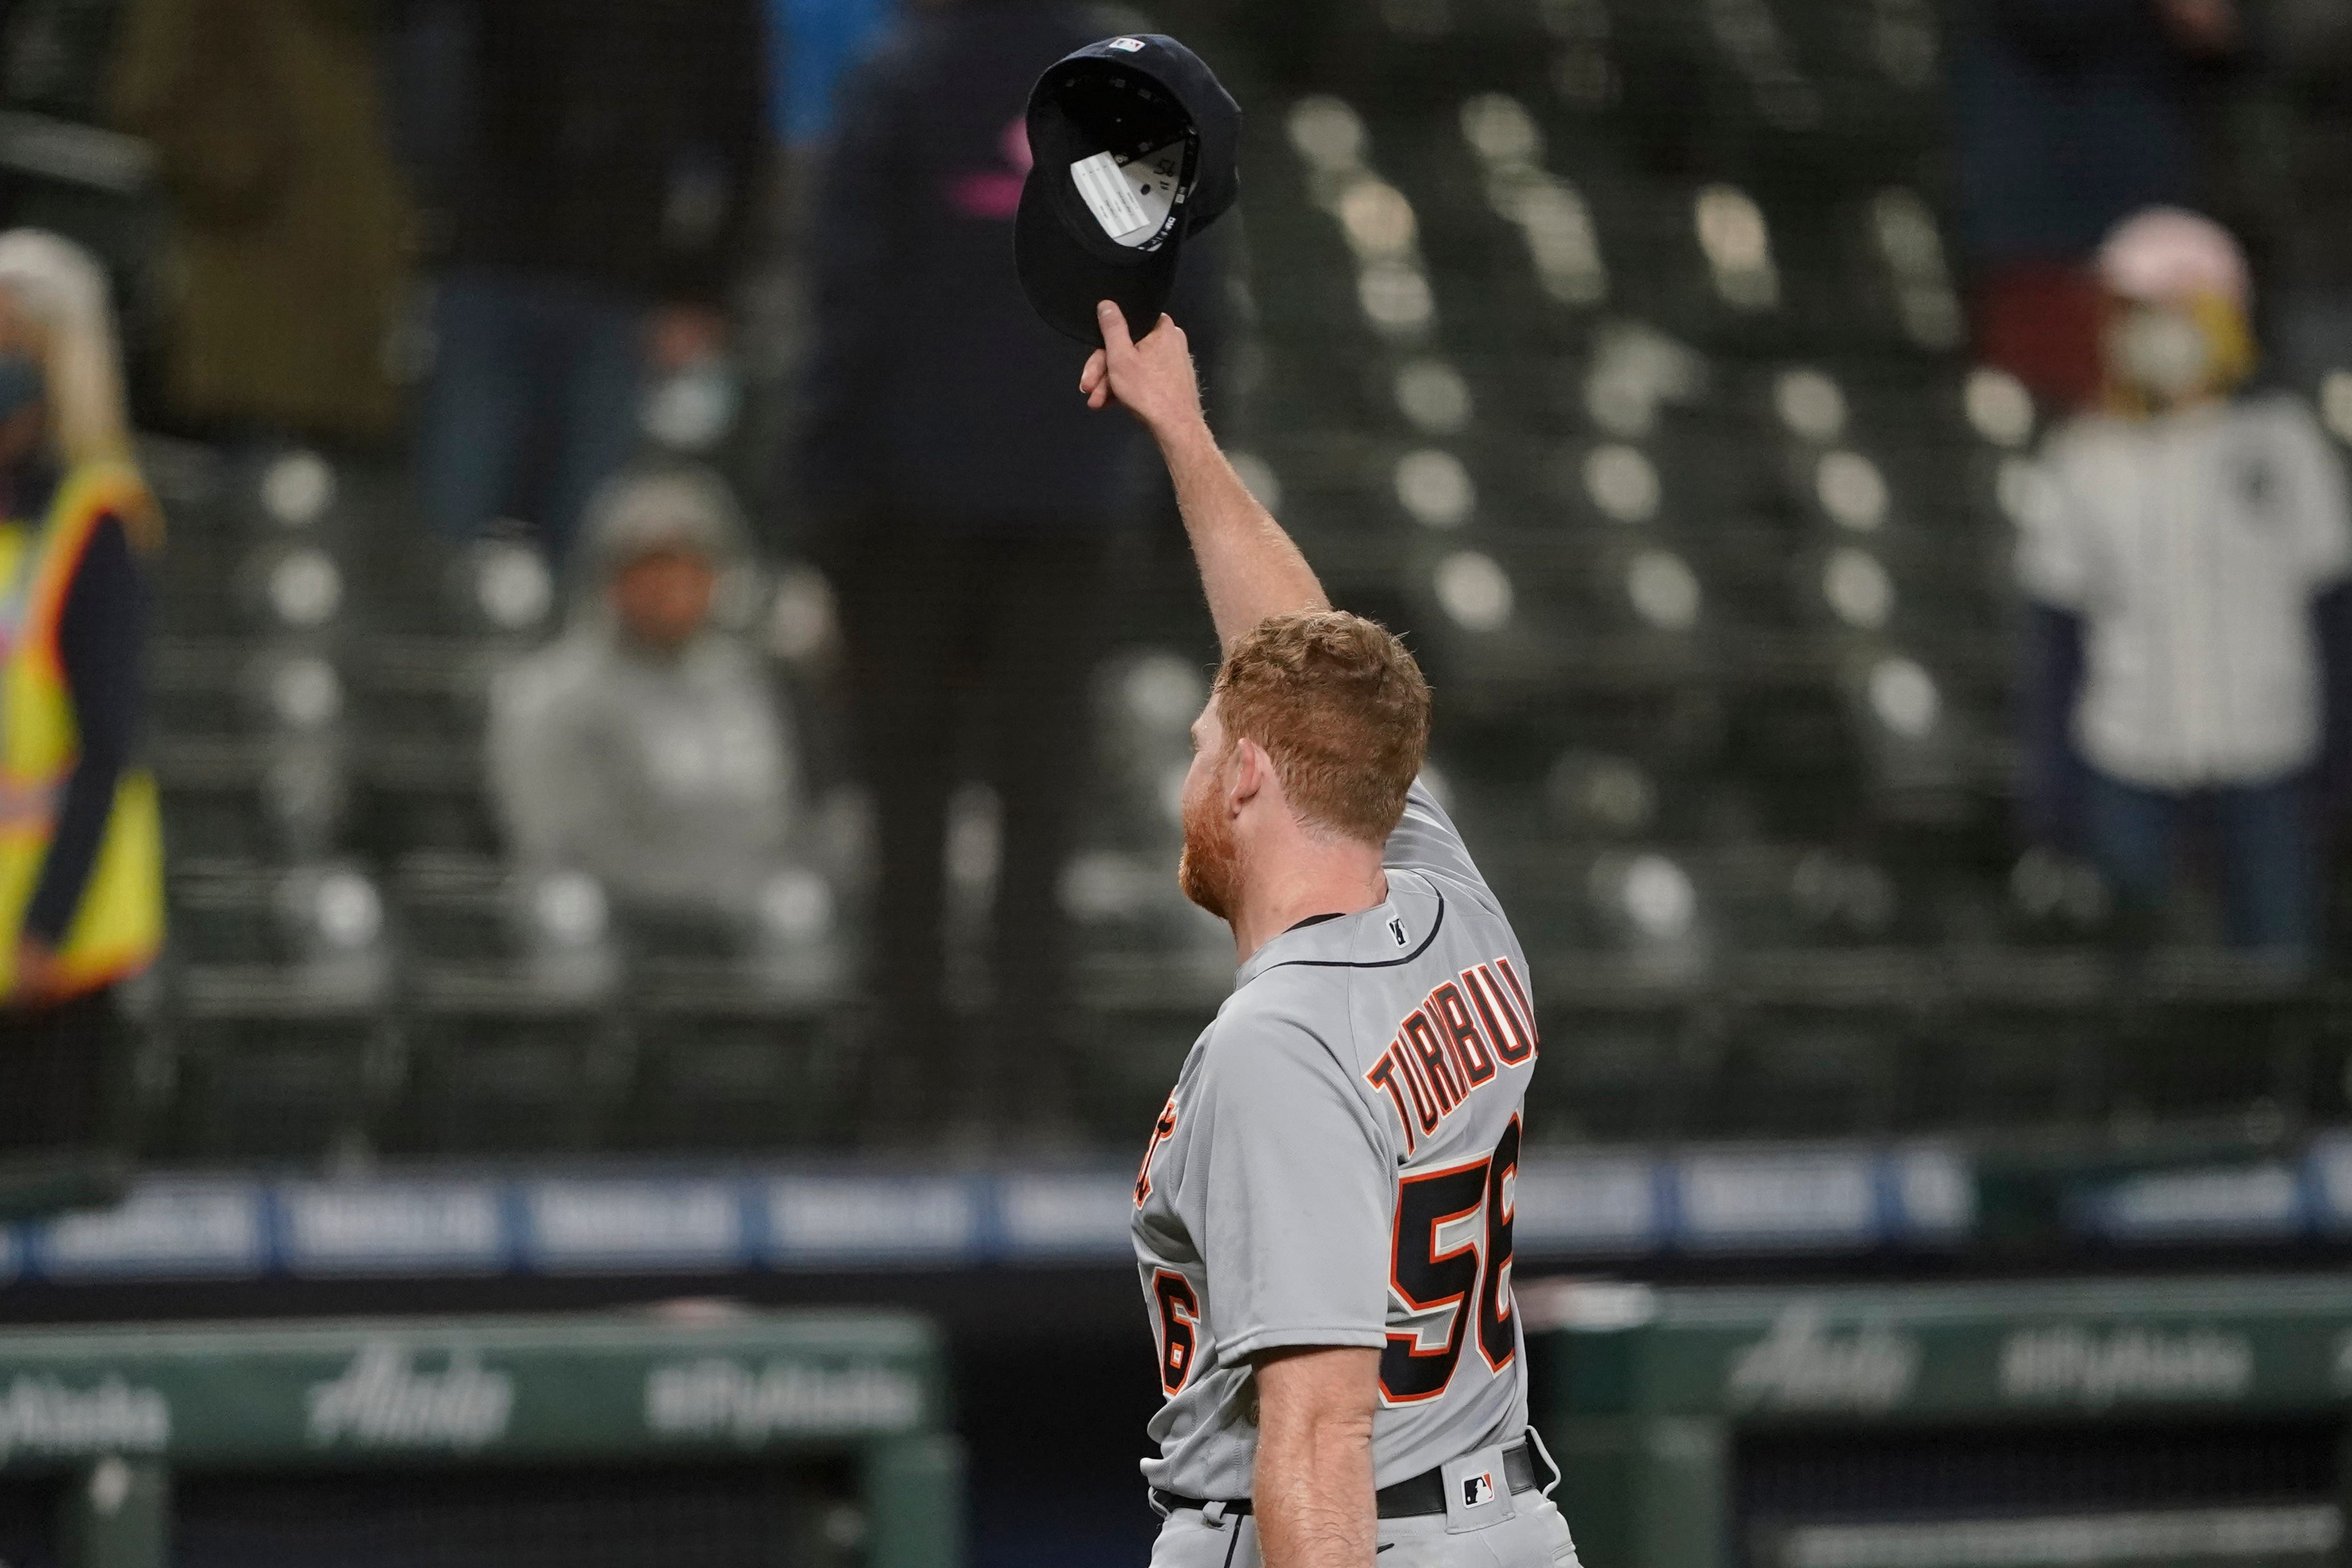 Detroit Tigers starting pitcher Spencer Turnbull tips his cap to the crowd after he threw a no-hitter baseball game against the Seattle Mariners, Tuesday, May 18, 2021, in Seattle.